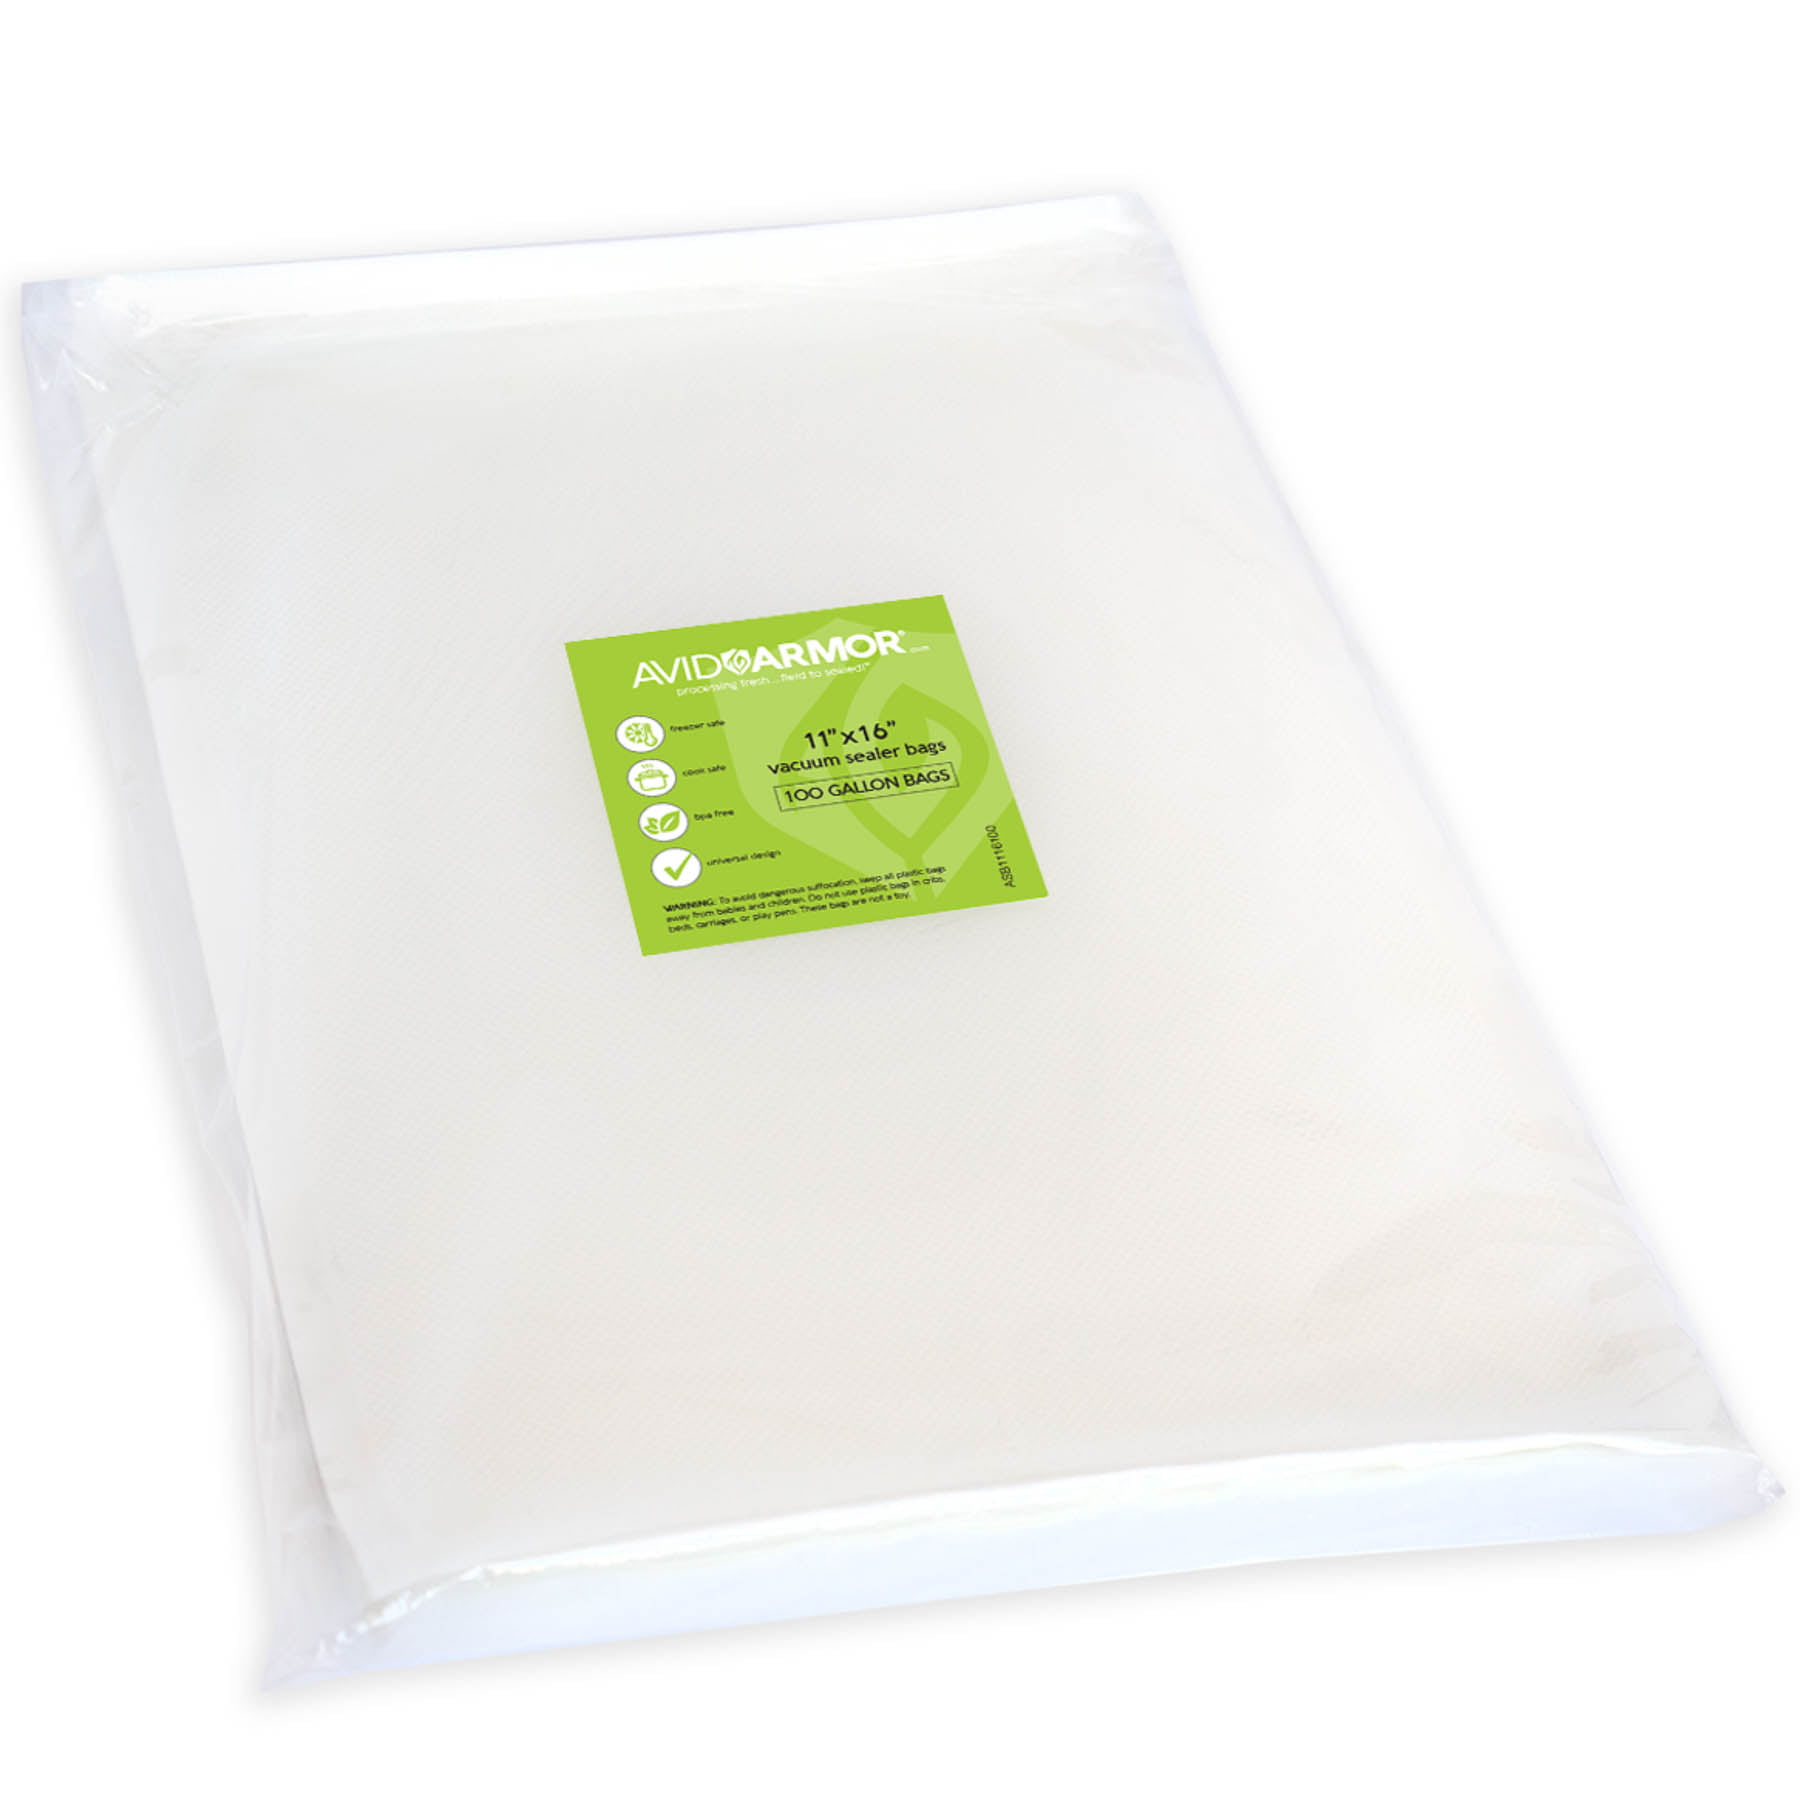 Wevac Vacuum Sealer Bags 100 Quart 8x12 Inch for Food Saver Seal a Meal Weston for sale online